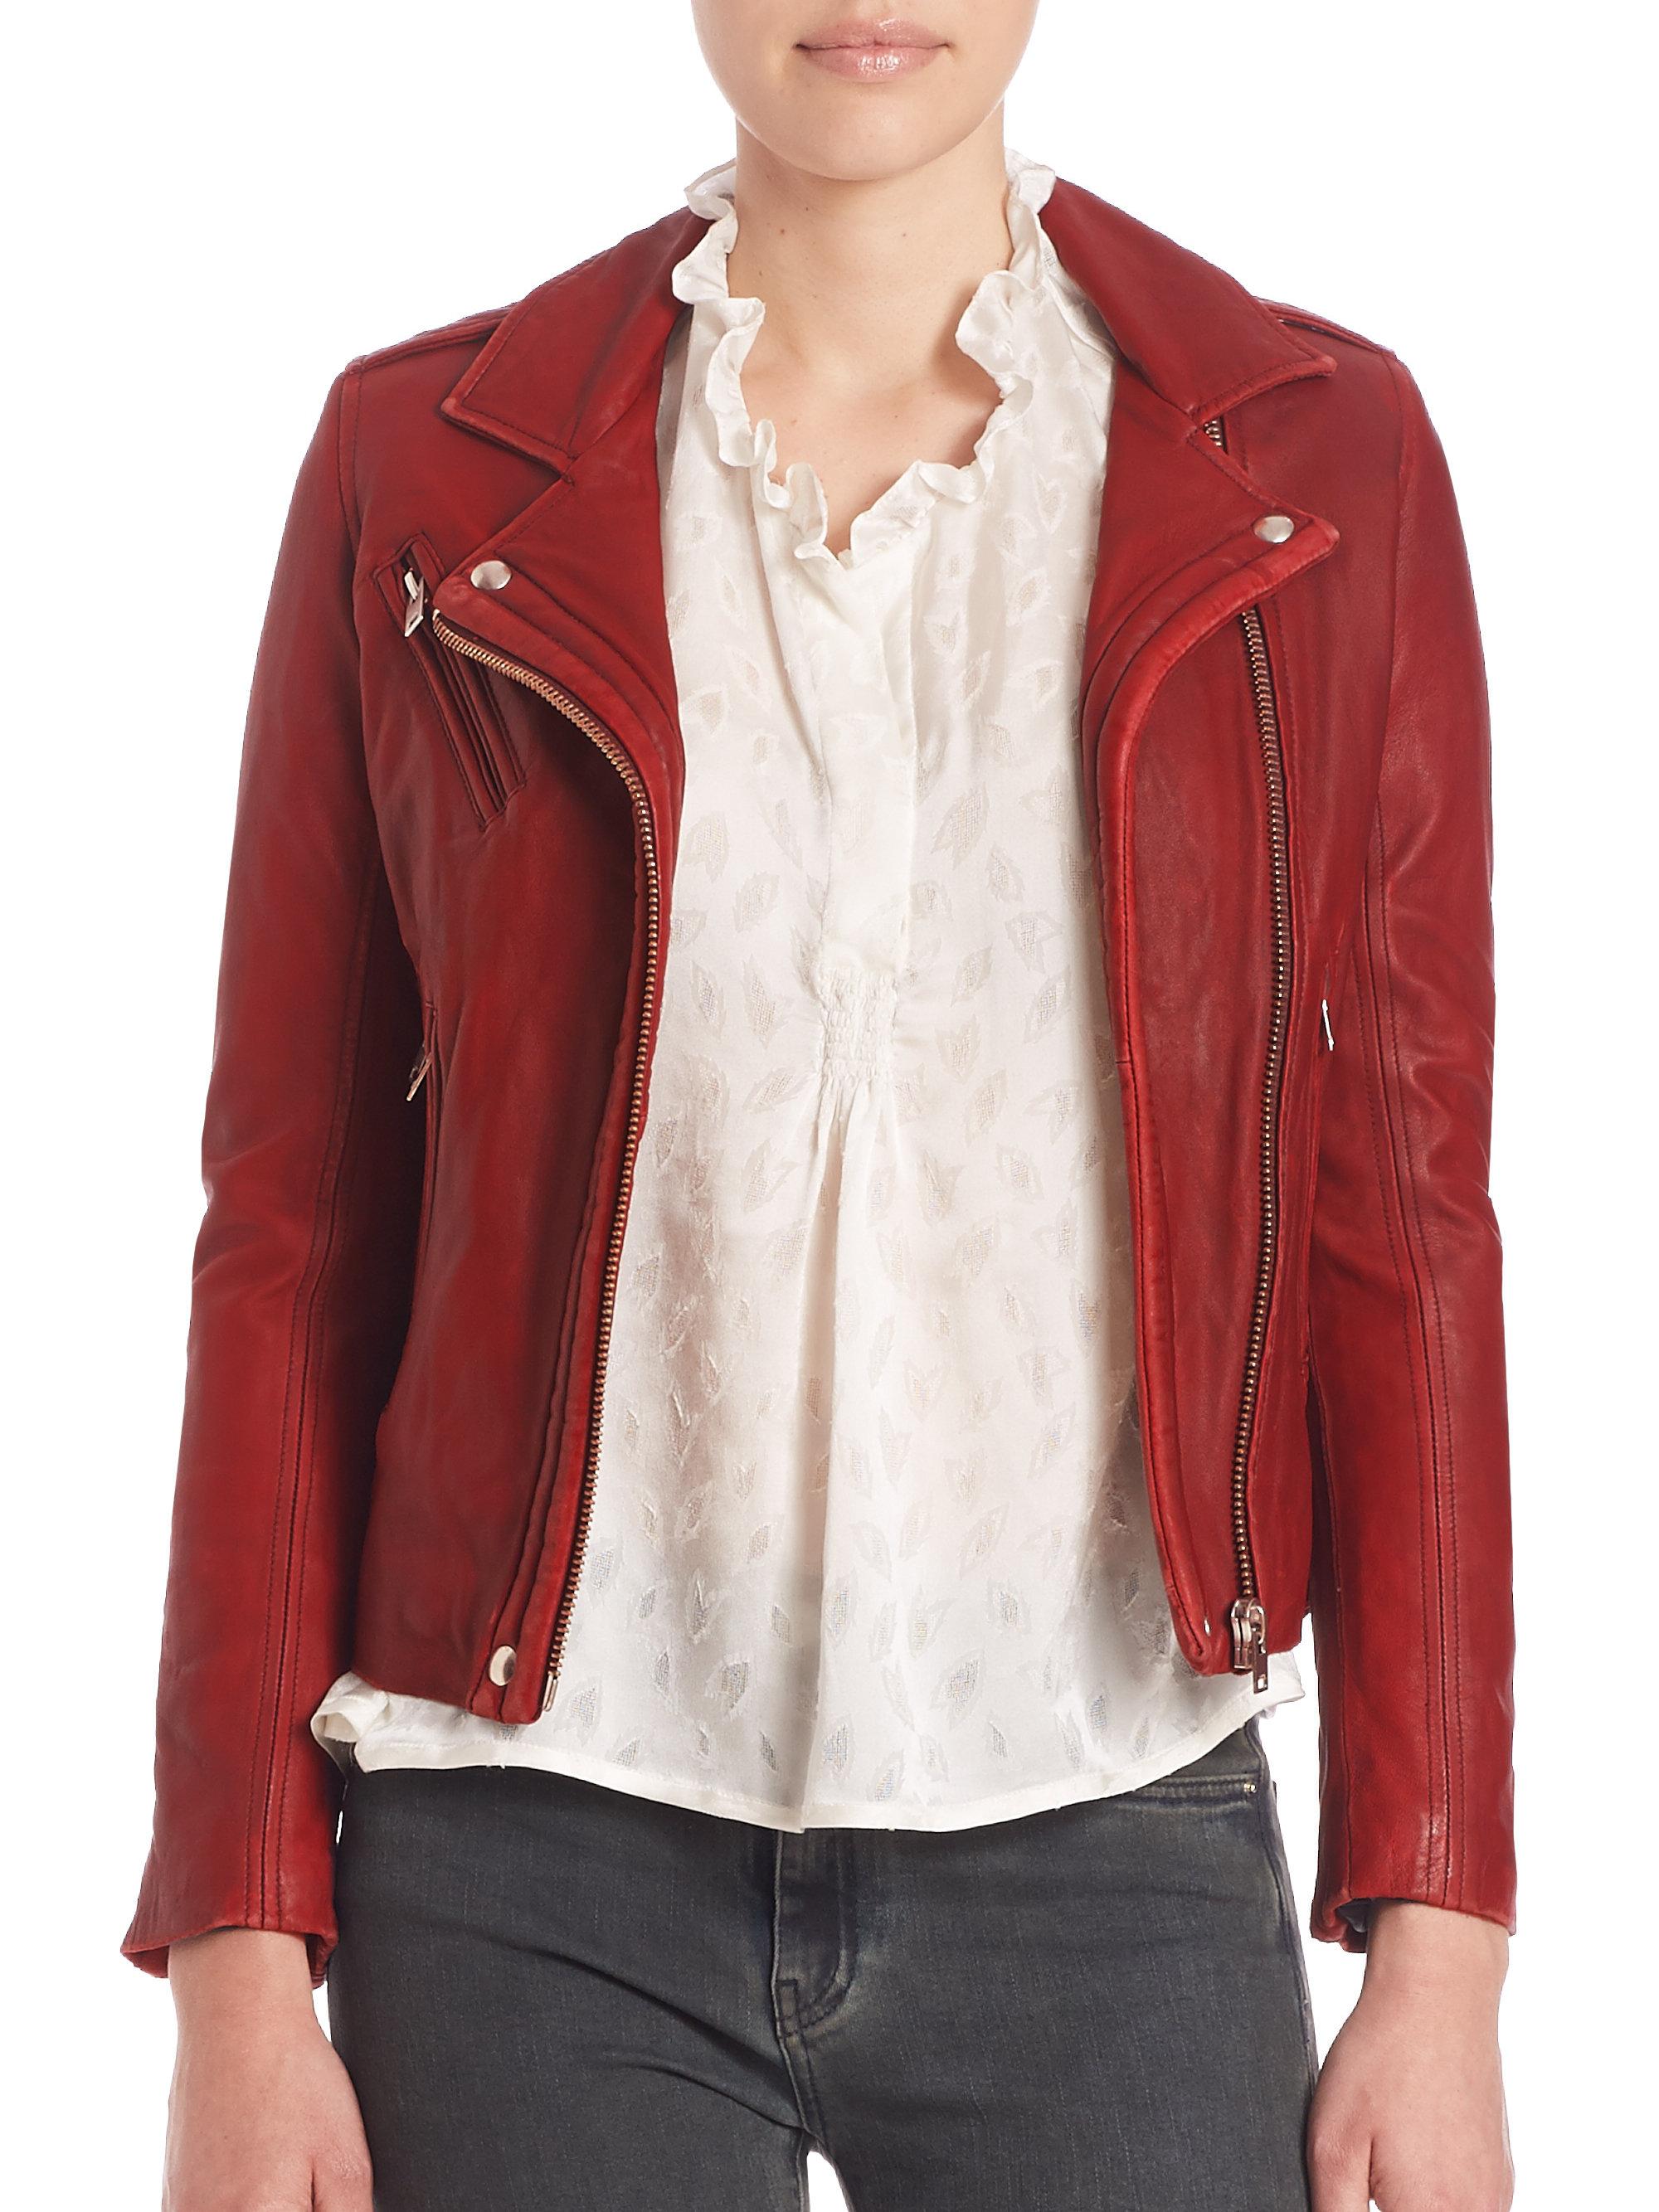 Lyst - Iro Han Leather Moto Jacket in Red